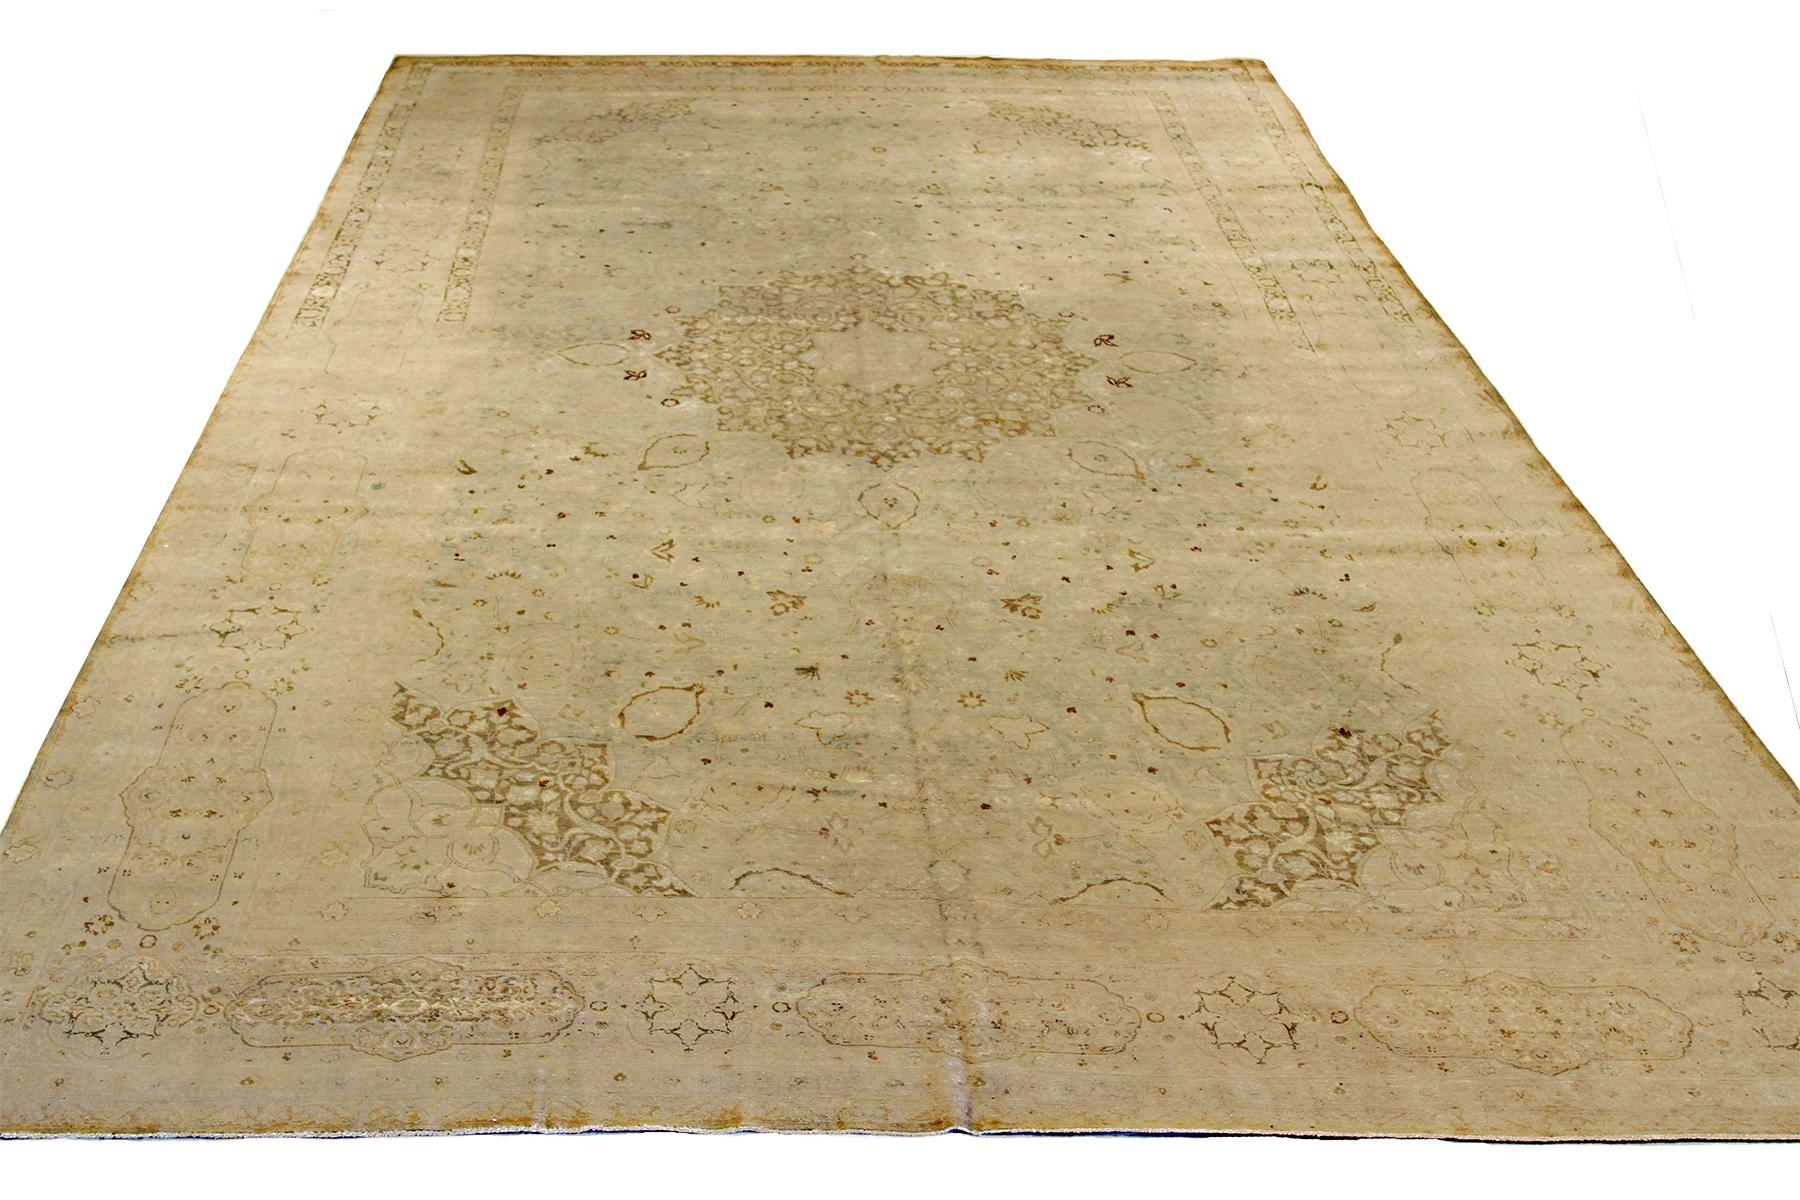 Antique Persian rug handwoven from the finest sheep’s wool and colored with all-natural vegetable dyes that are safe for humans and pets. It’s a traditional Tabriz weaving featuring an elegant ensemble of floral designs in brown with shades of gray